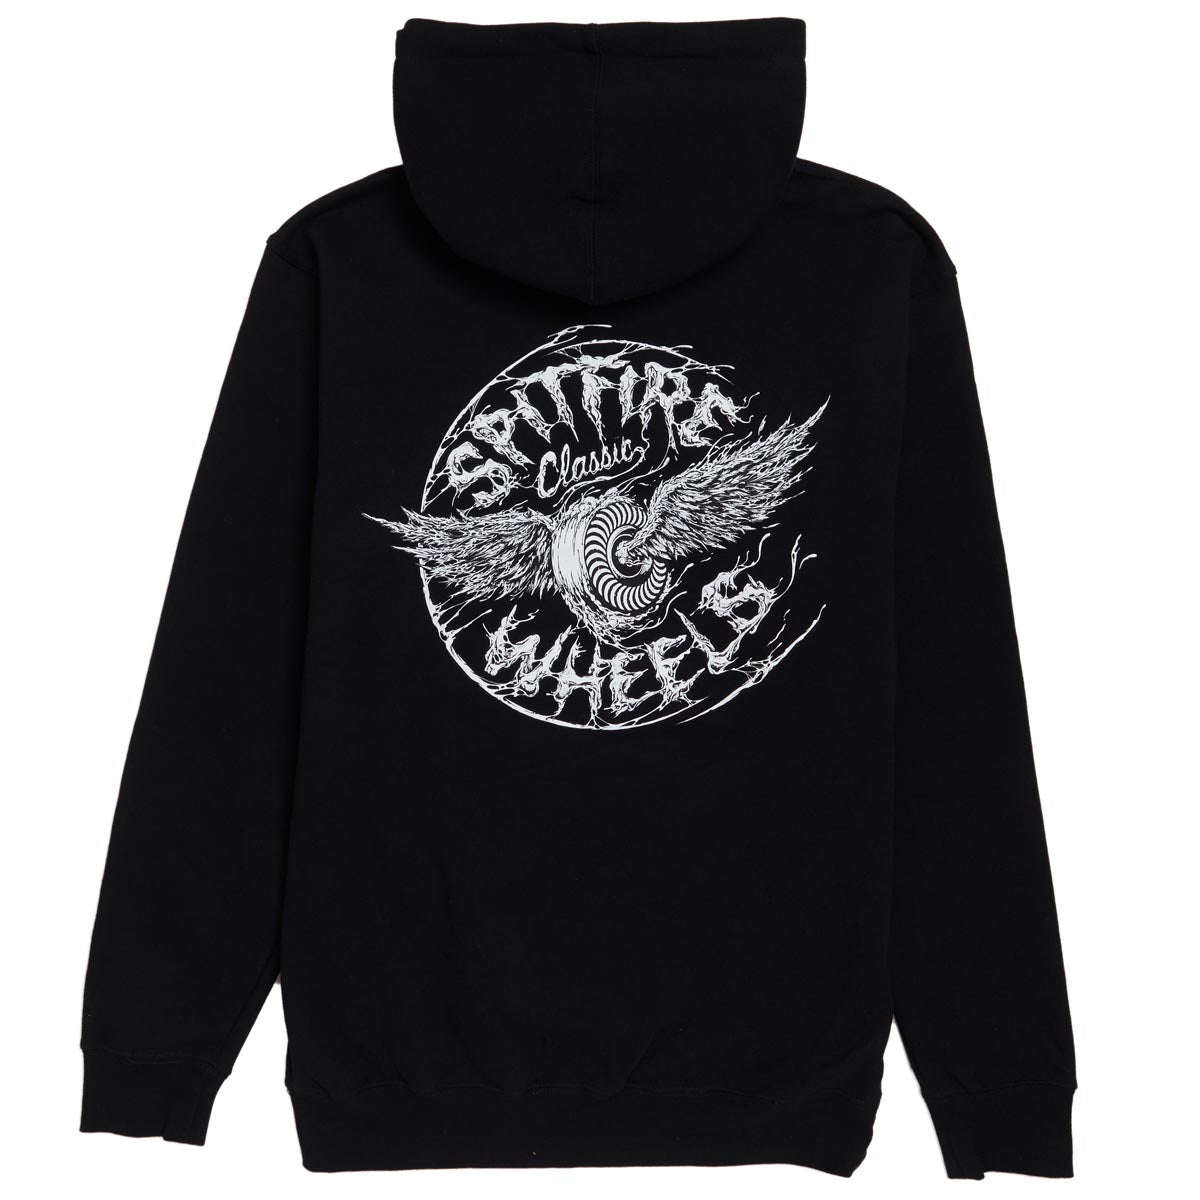 Spitfire Decay Flying Classic Hoodie - Black image 1